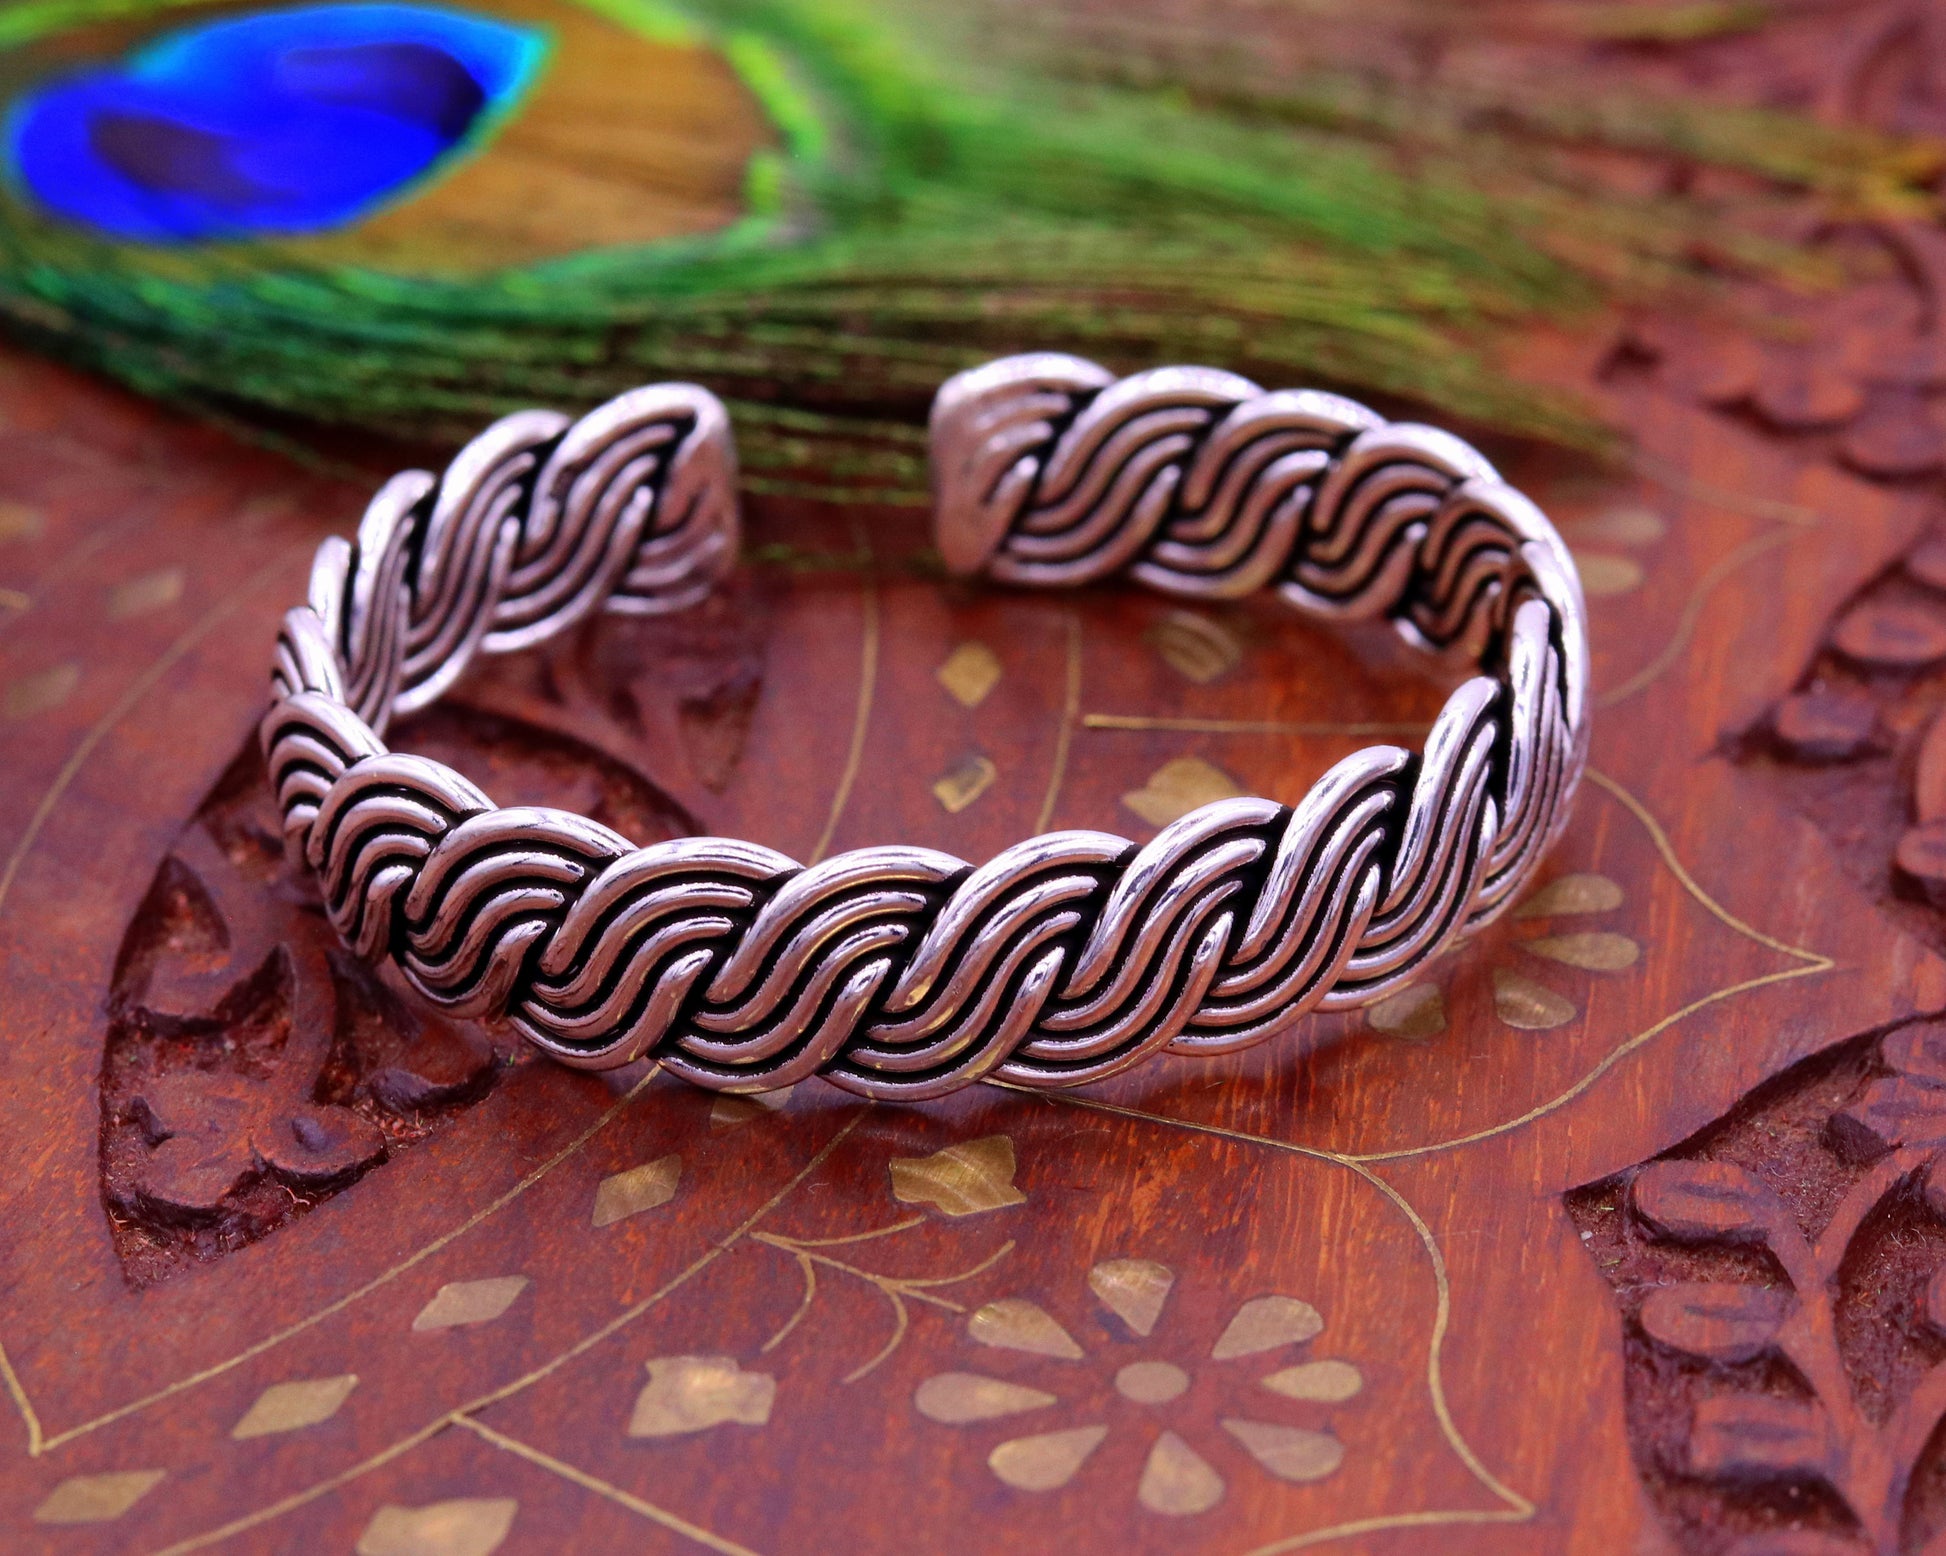 925 sterling silver handmade twisted design fabulous open face adjustable bangle cuff bracelet kada, excellent gifting jewelry her nsk214 - TRIBAL ORNAMENTS